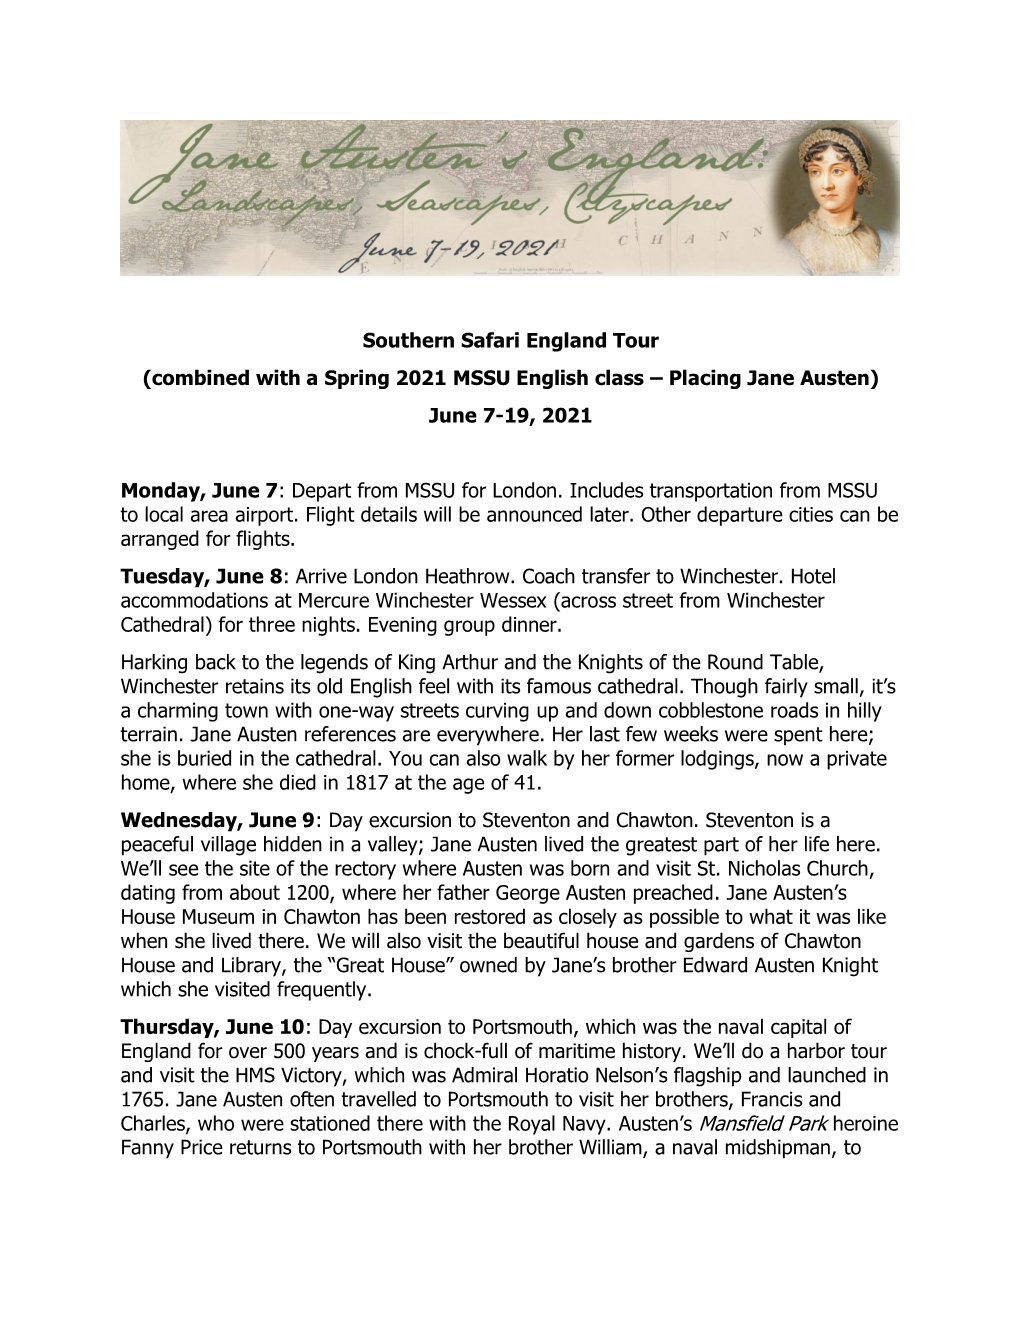 Southern Safari England Tour (Combined with a Spring 2021 MSSU English Class – Placing Jane Austen) June 7-19, 2021